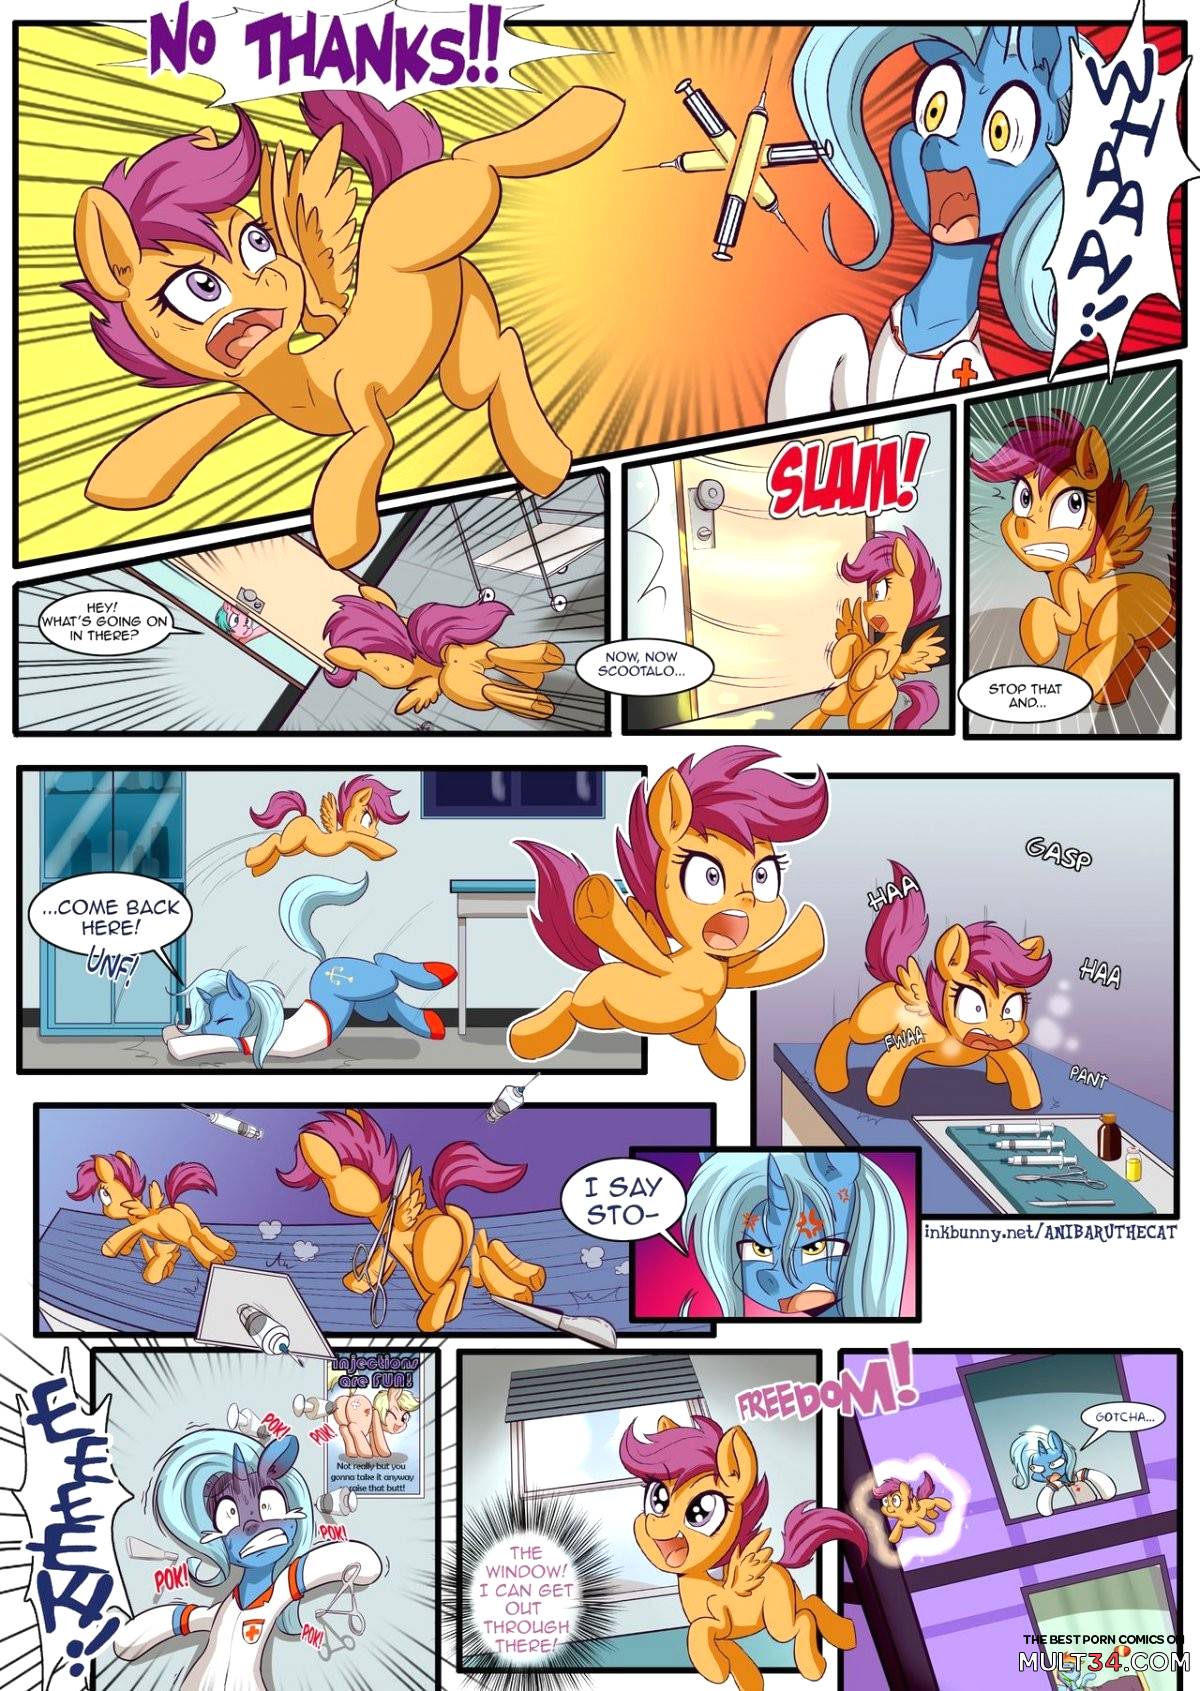 Cutie mark check up 2 page 4